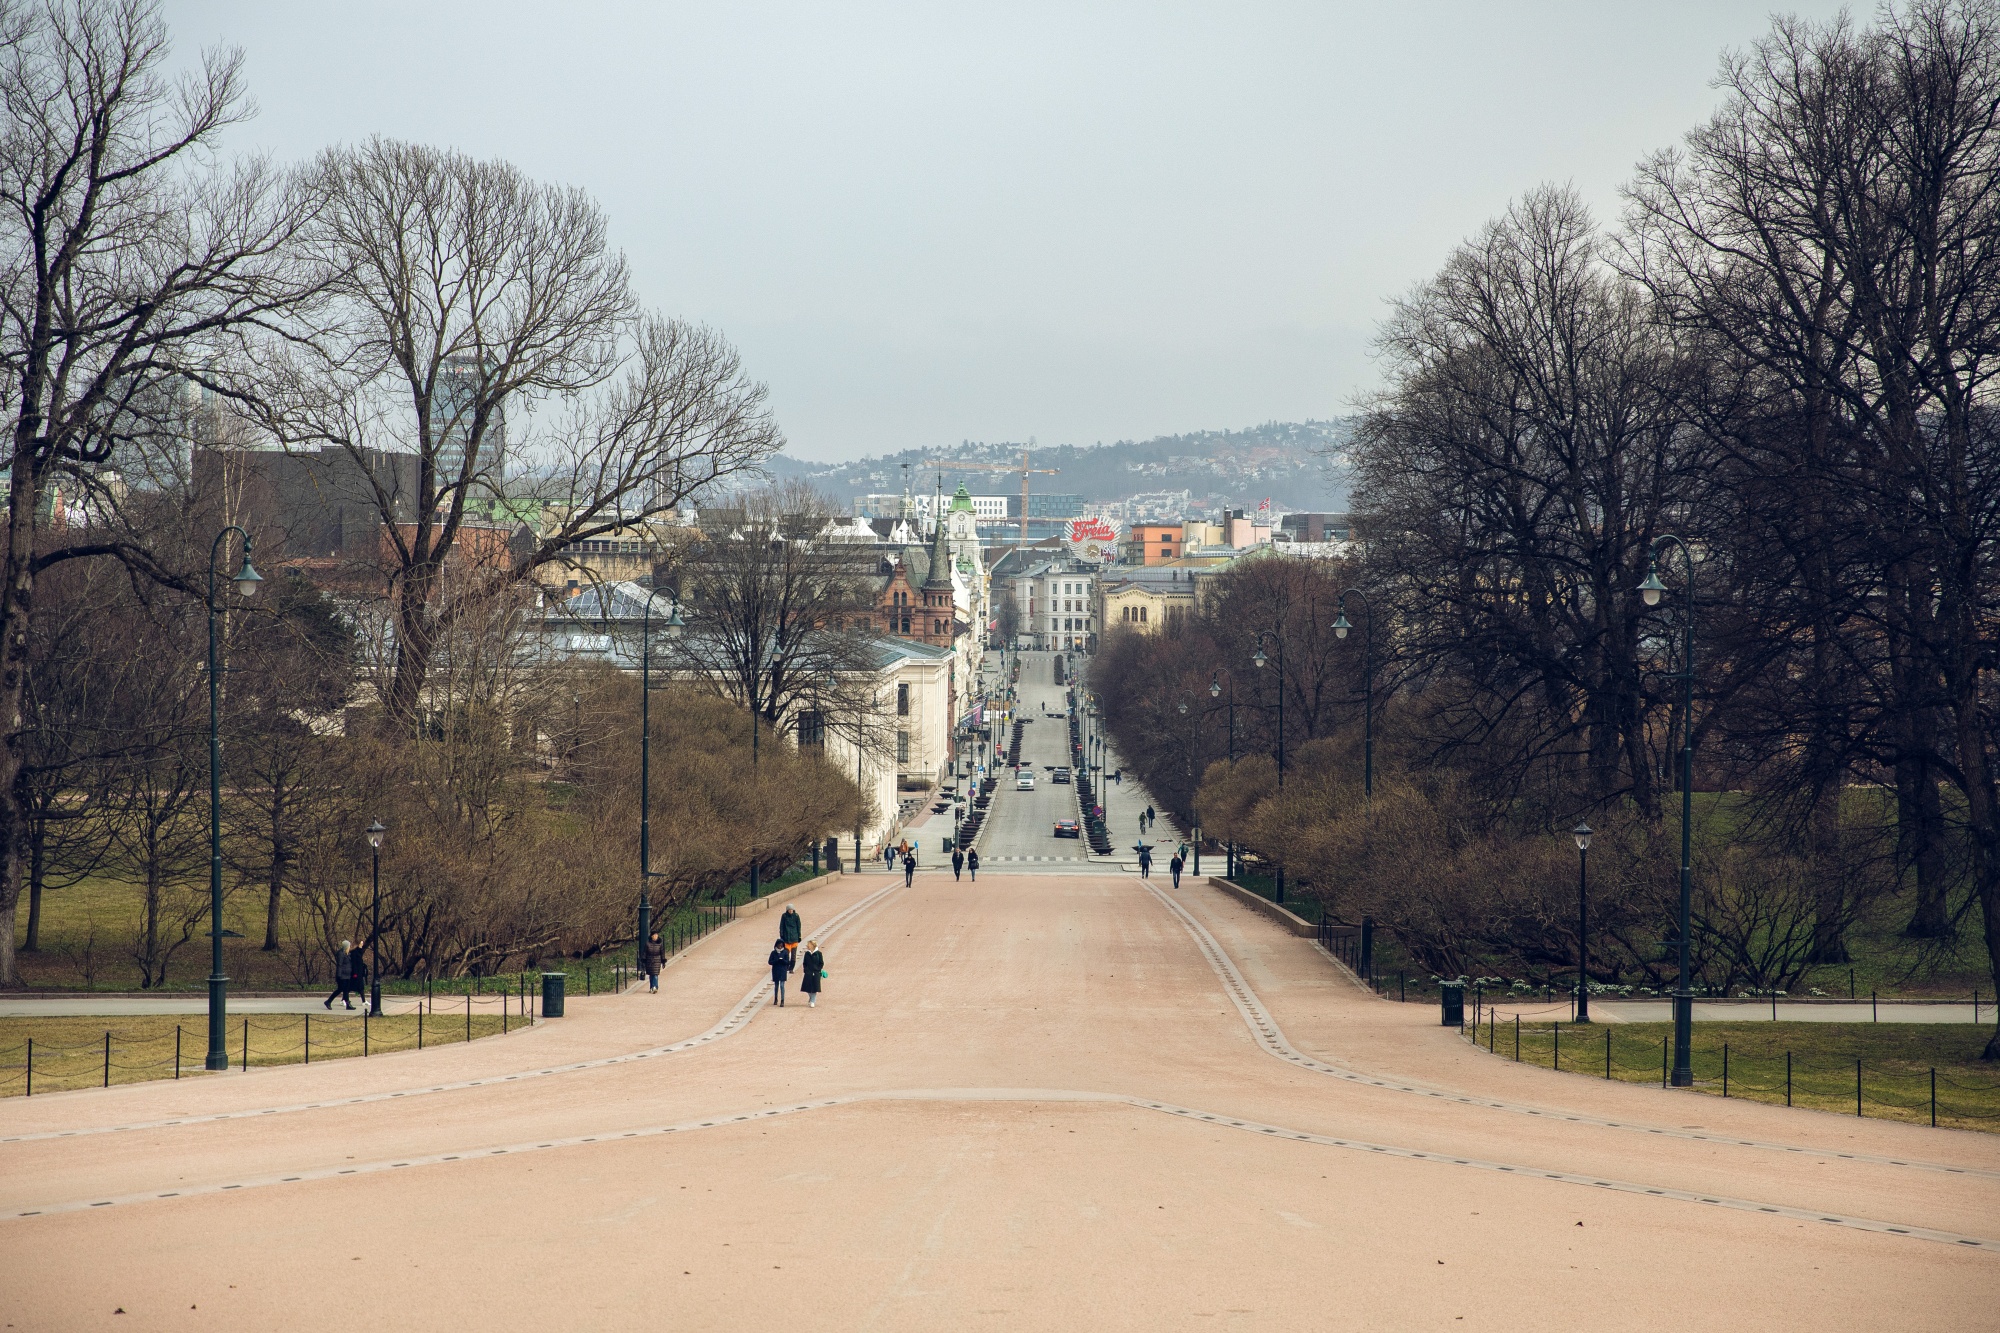 Pedestrians walk towards the Royal Palace in Oslo.